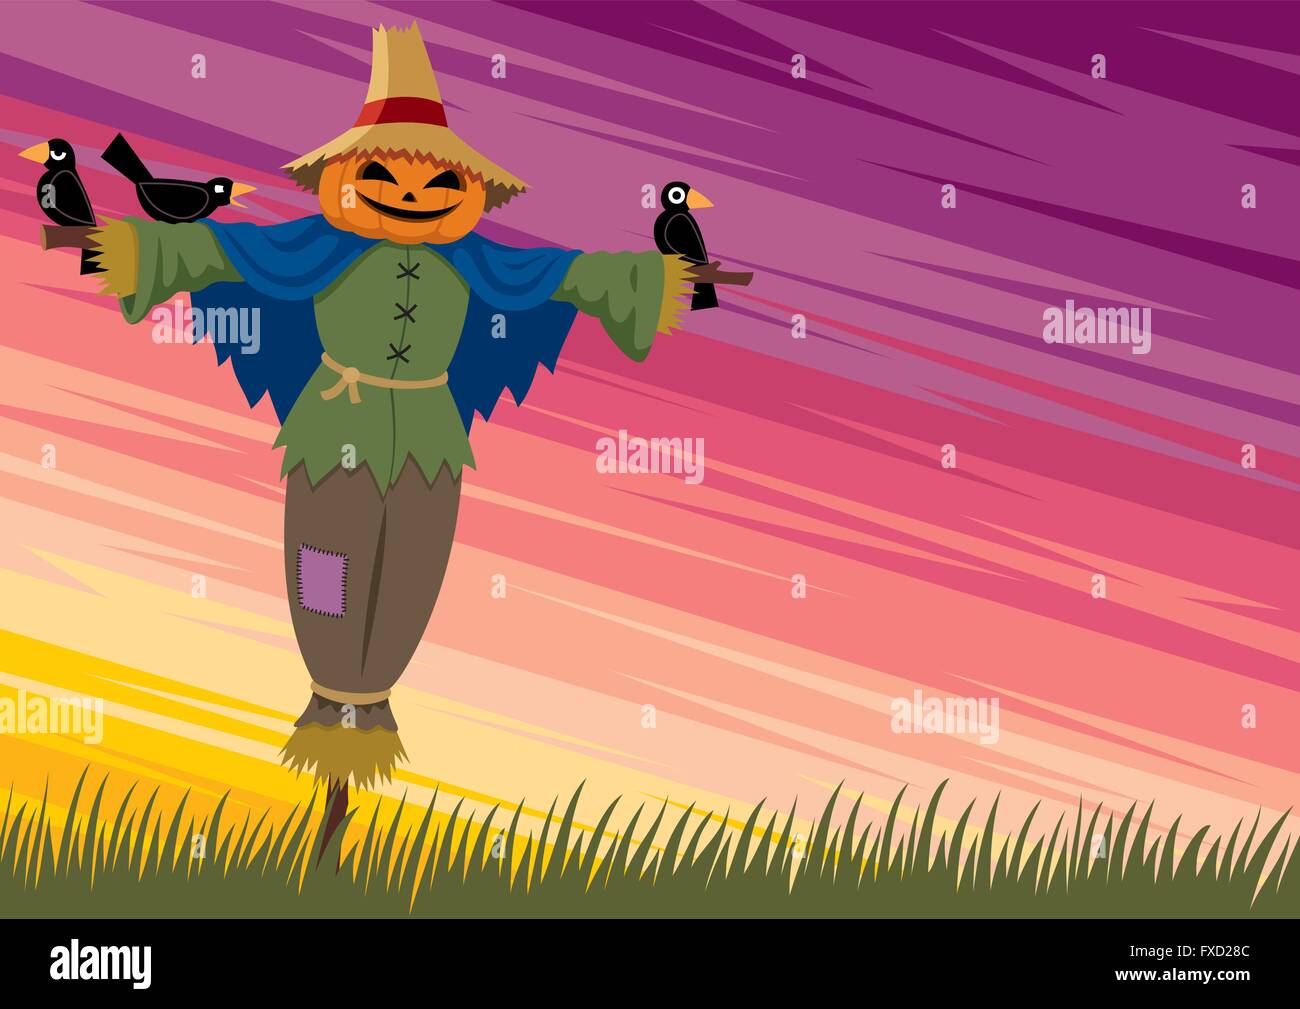 Cartoon background with scarecrow and empty space for your text. Stock Vector